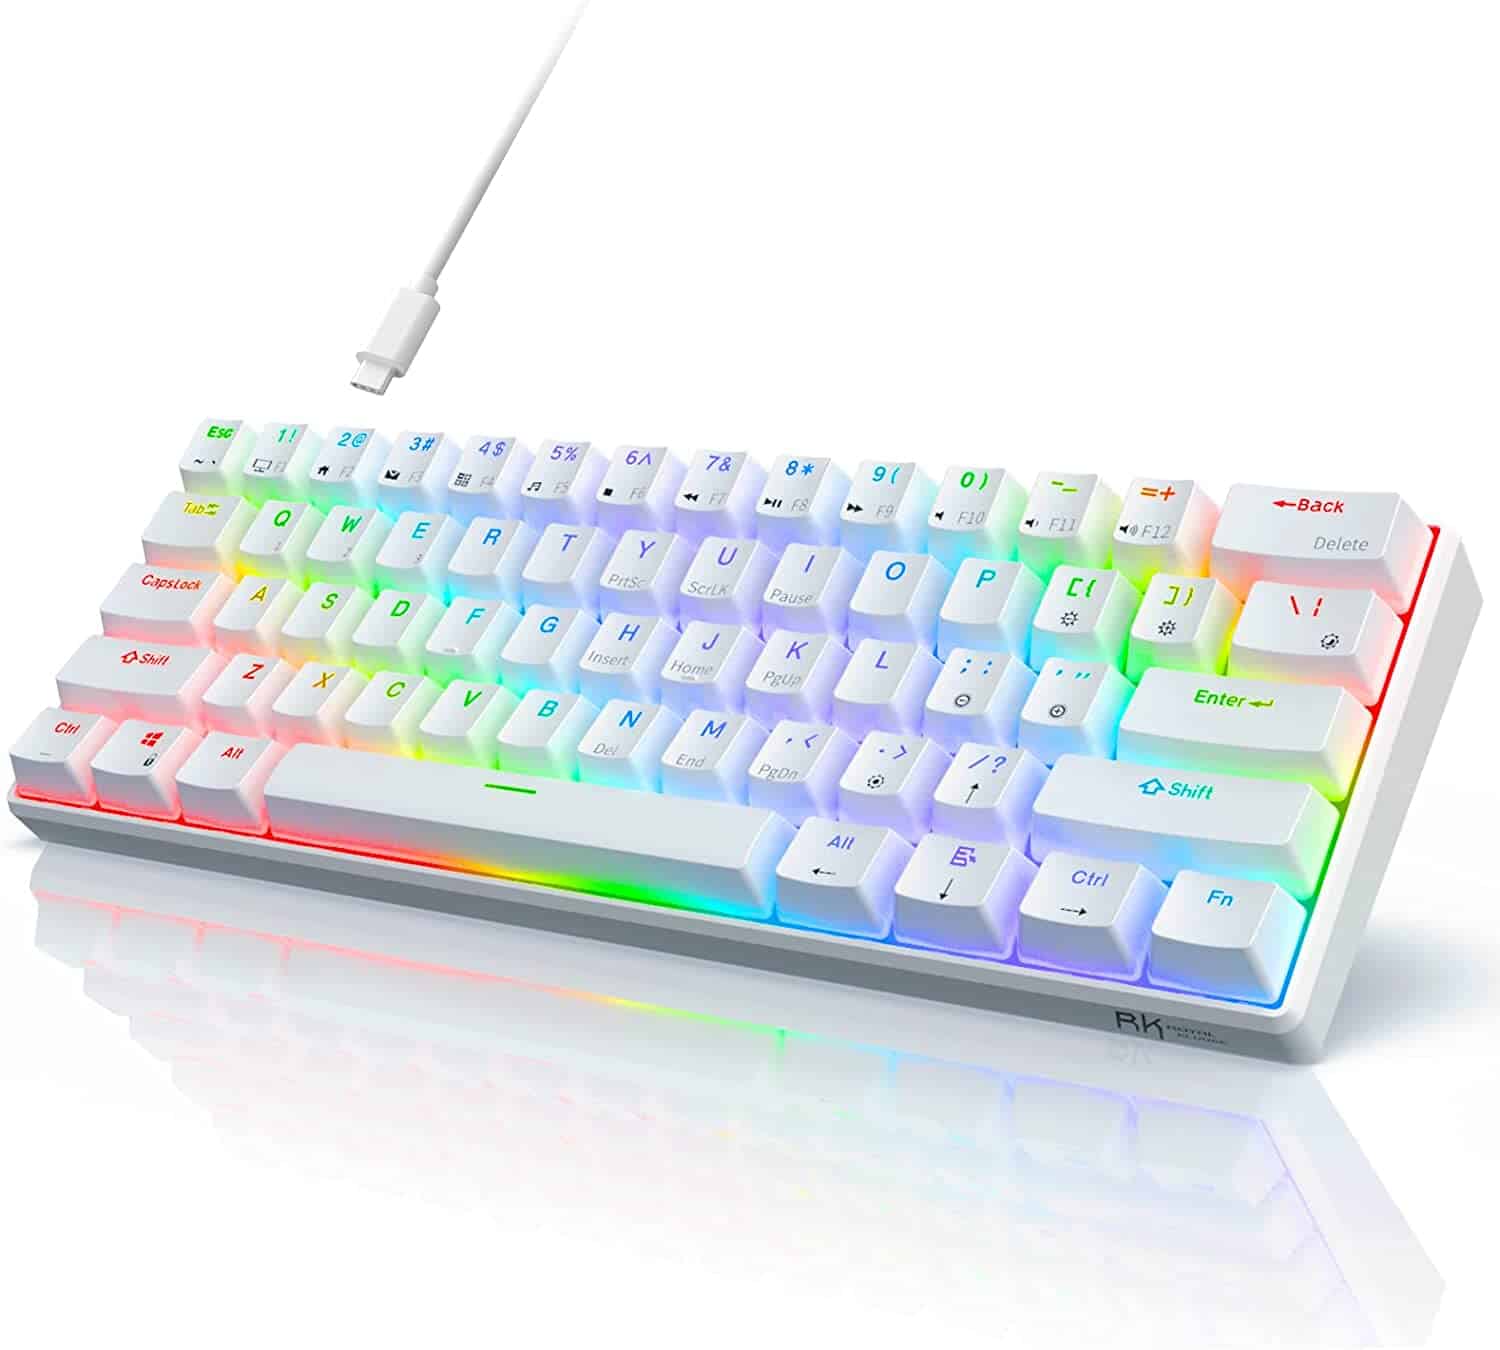 Best Budget Mechanical Keyboard For Typing?